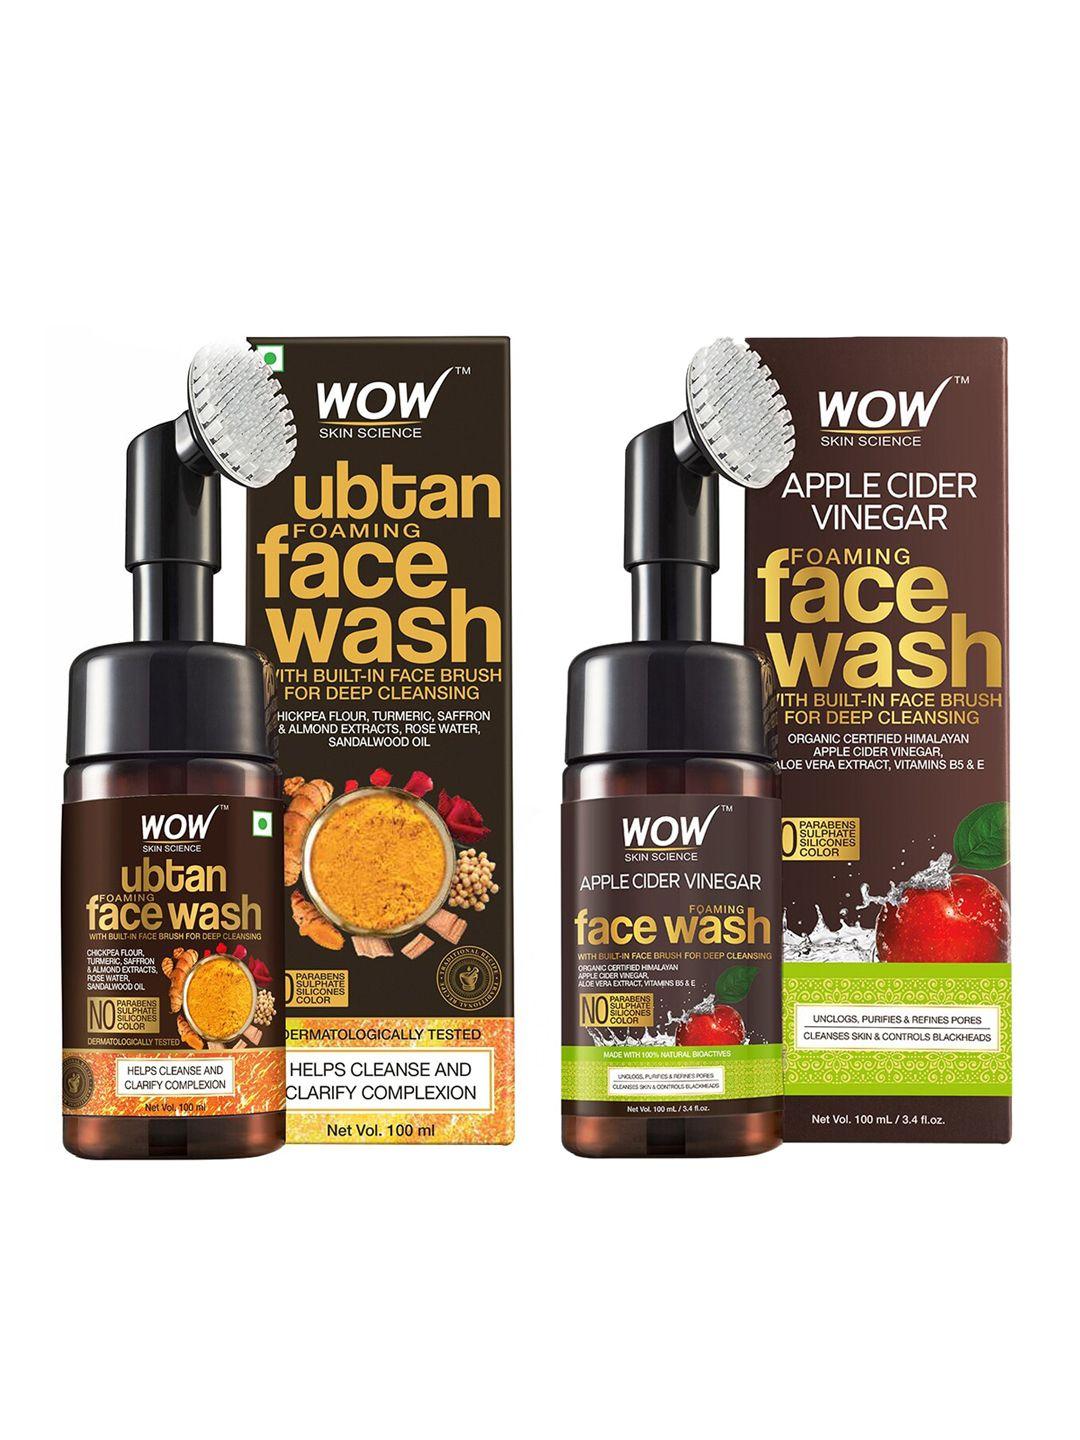 wow skin science unisex set of 2 face washes